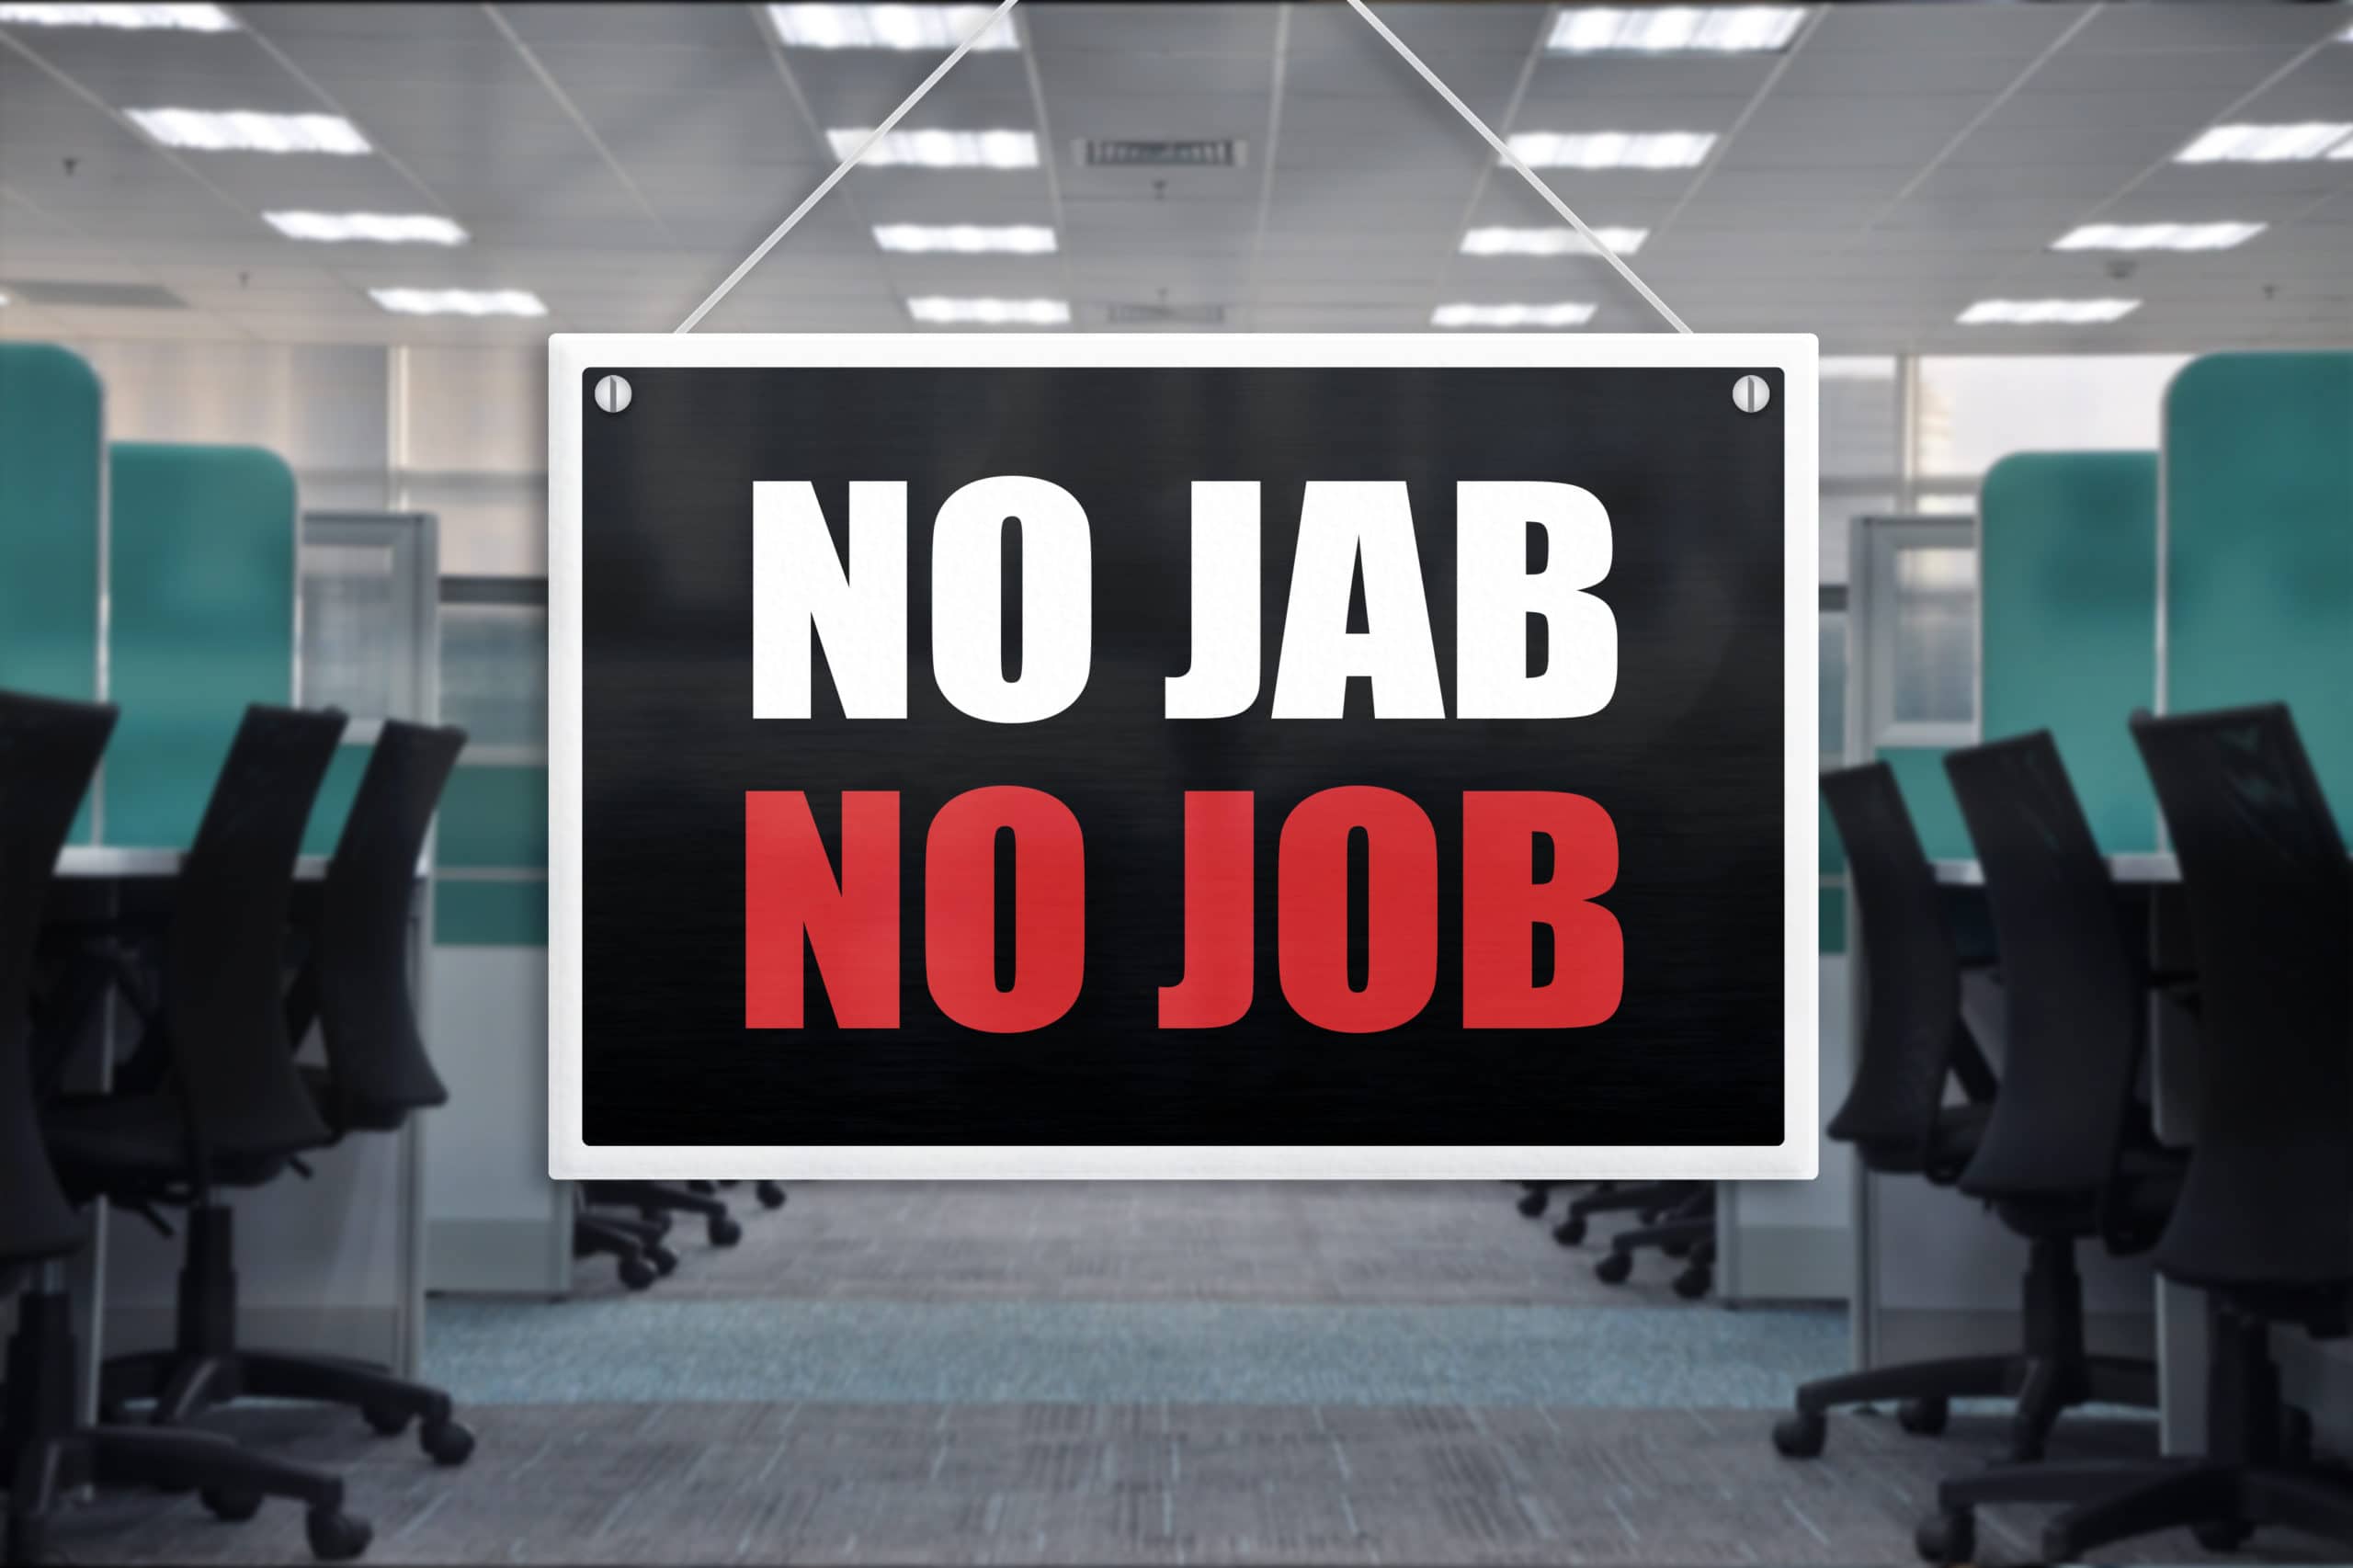 No Jab, No Job? – The Proposed Law Amendment and the Related Employment Law Issues